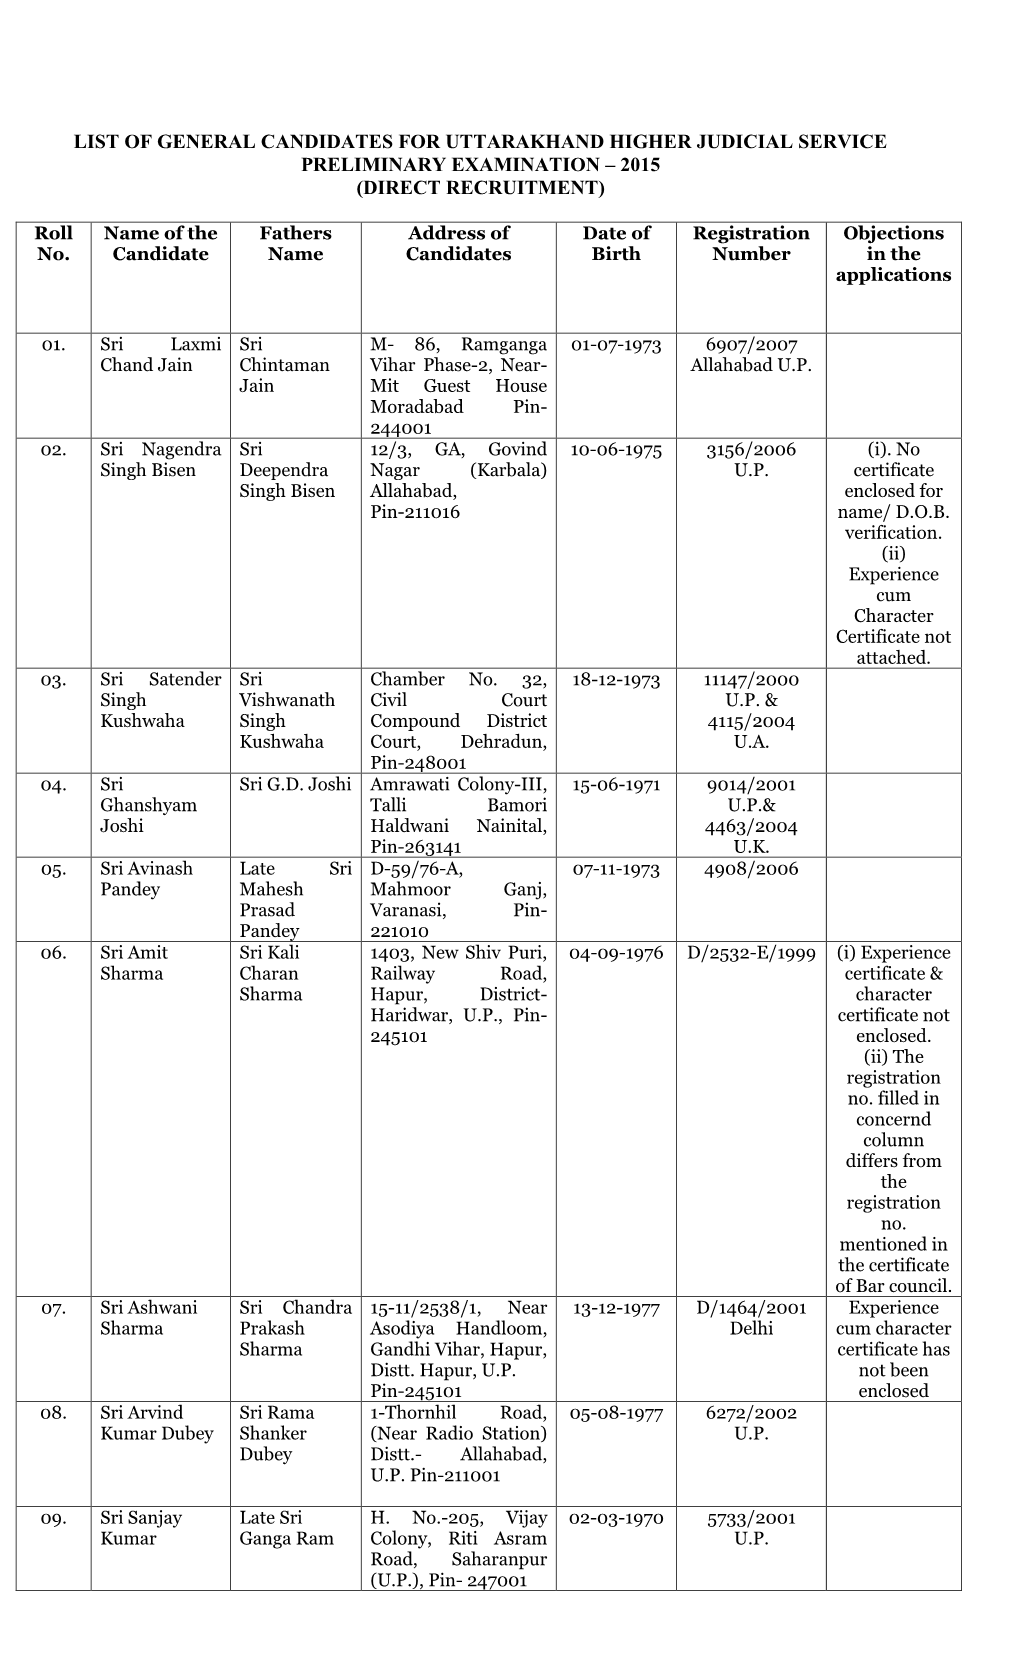 List of General Candidates for Uttarakhand Higher Judicial Service Preliminary Examination – 2015 (Direct Recruitment)